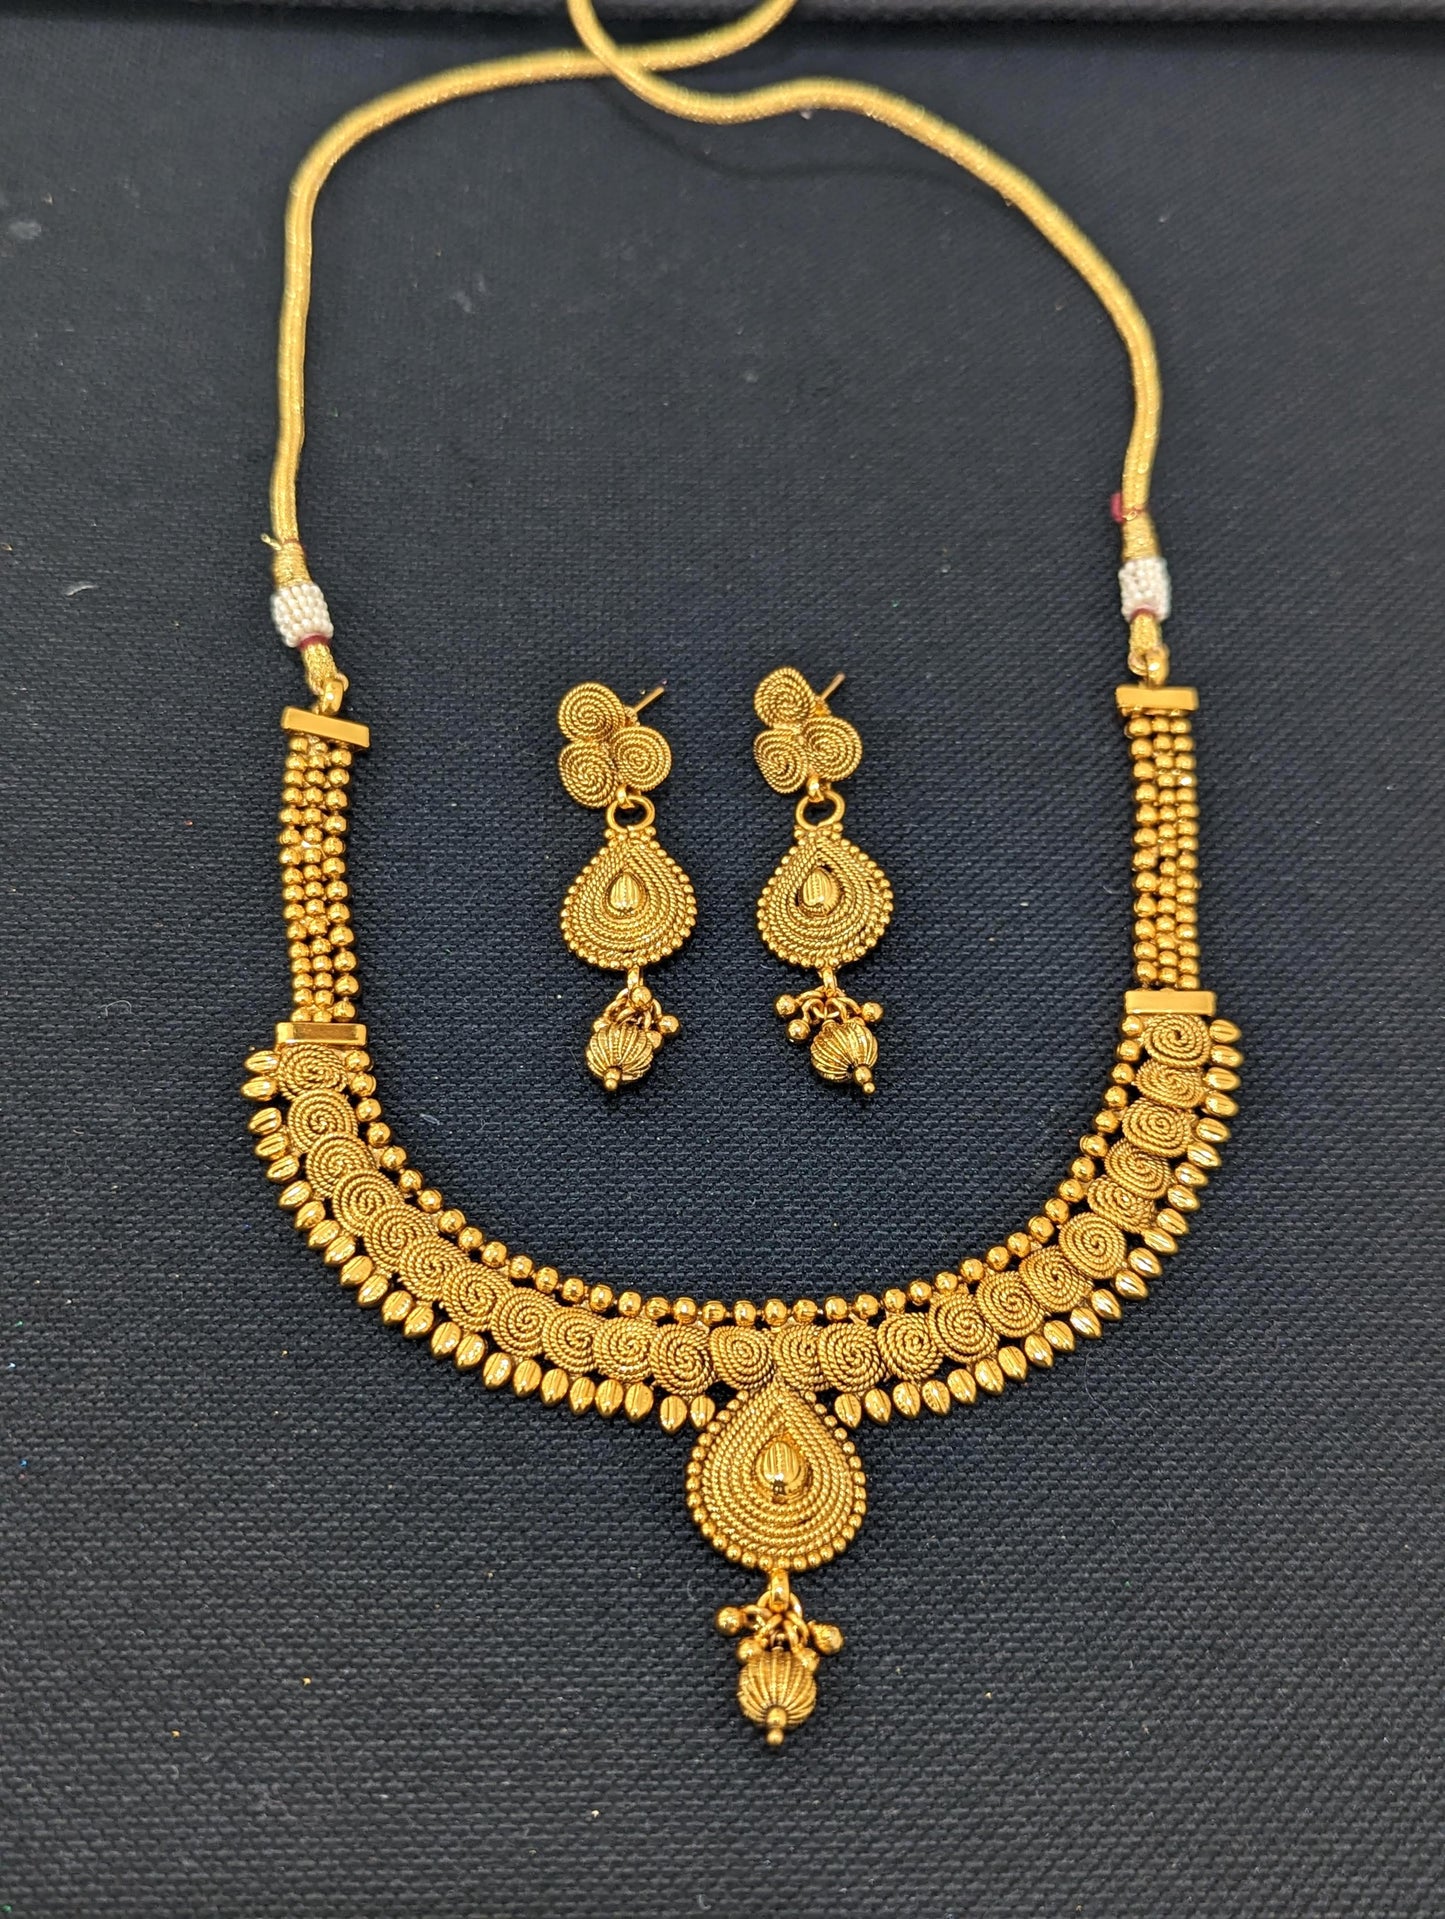 Real gold look alike Choker Necklace and Earrings set - Design 2